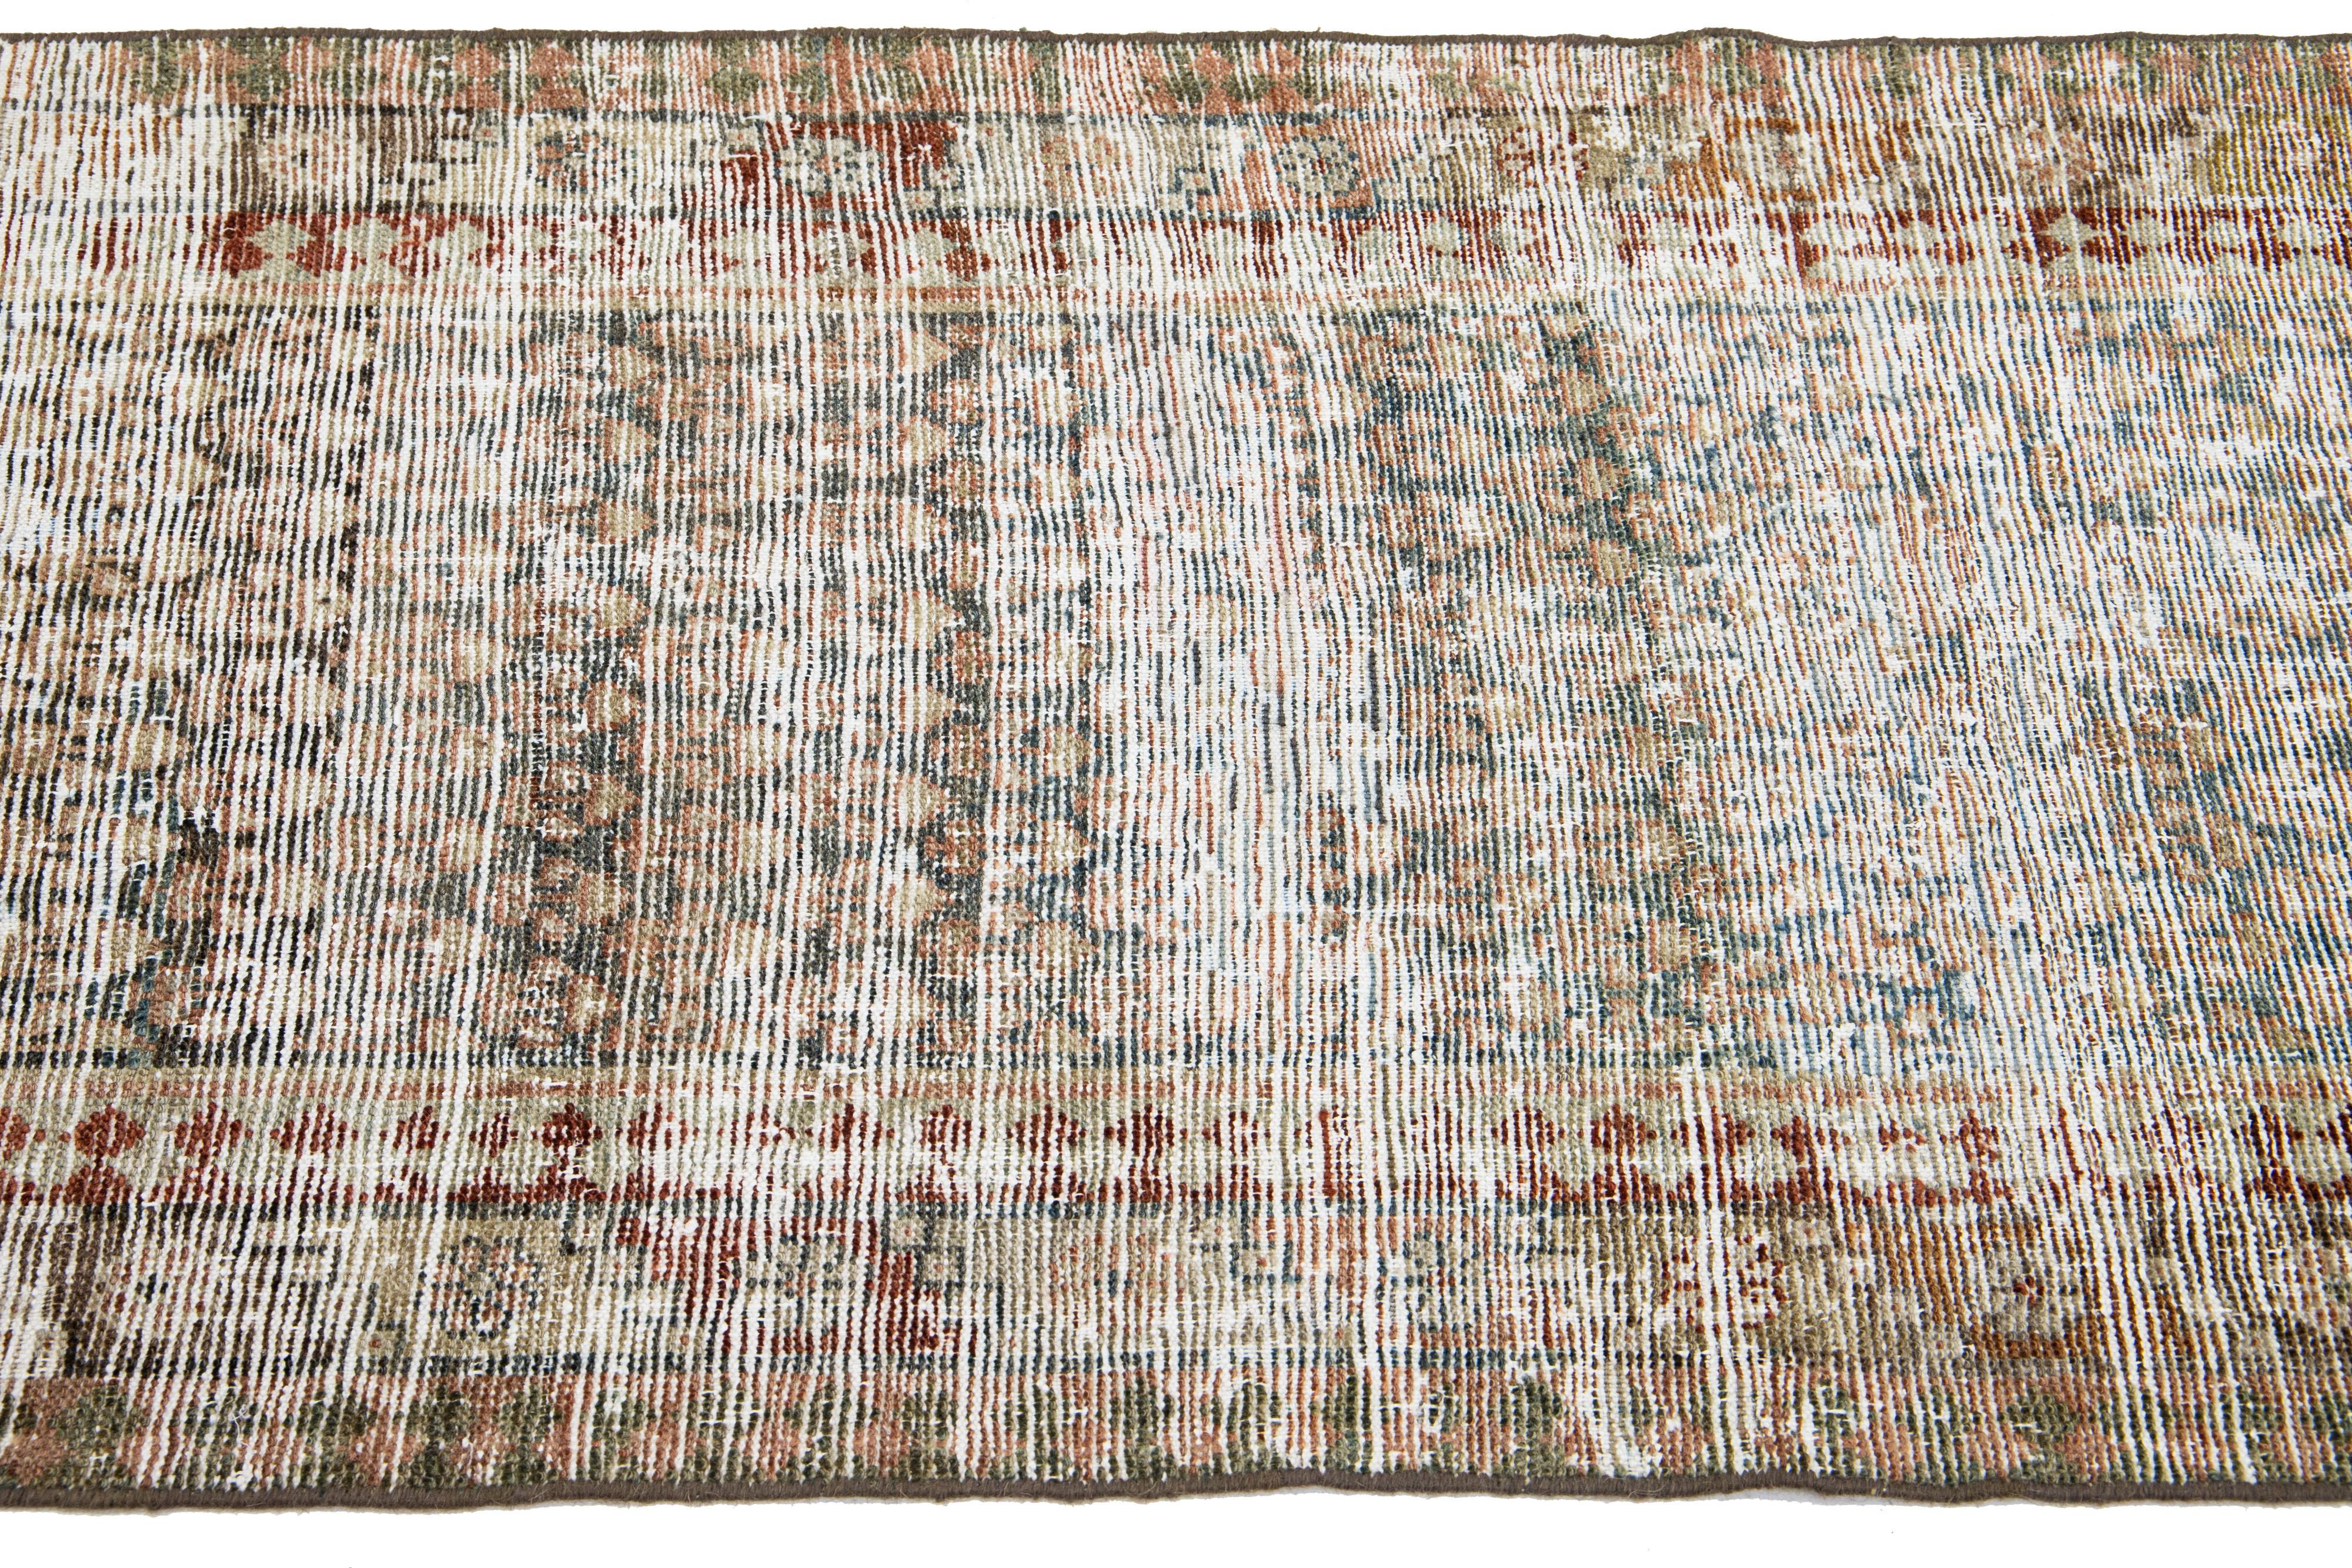 Blue Malayer Persian Wool Runner With Allover Motif From The 1900s In Distressed Condition For Sale In Norwalk, CT